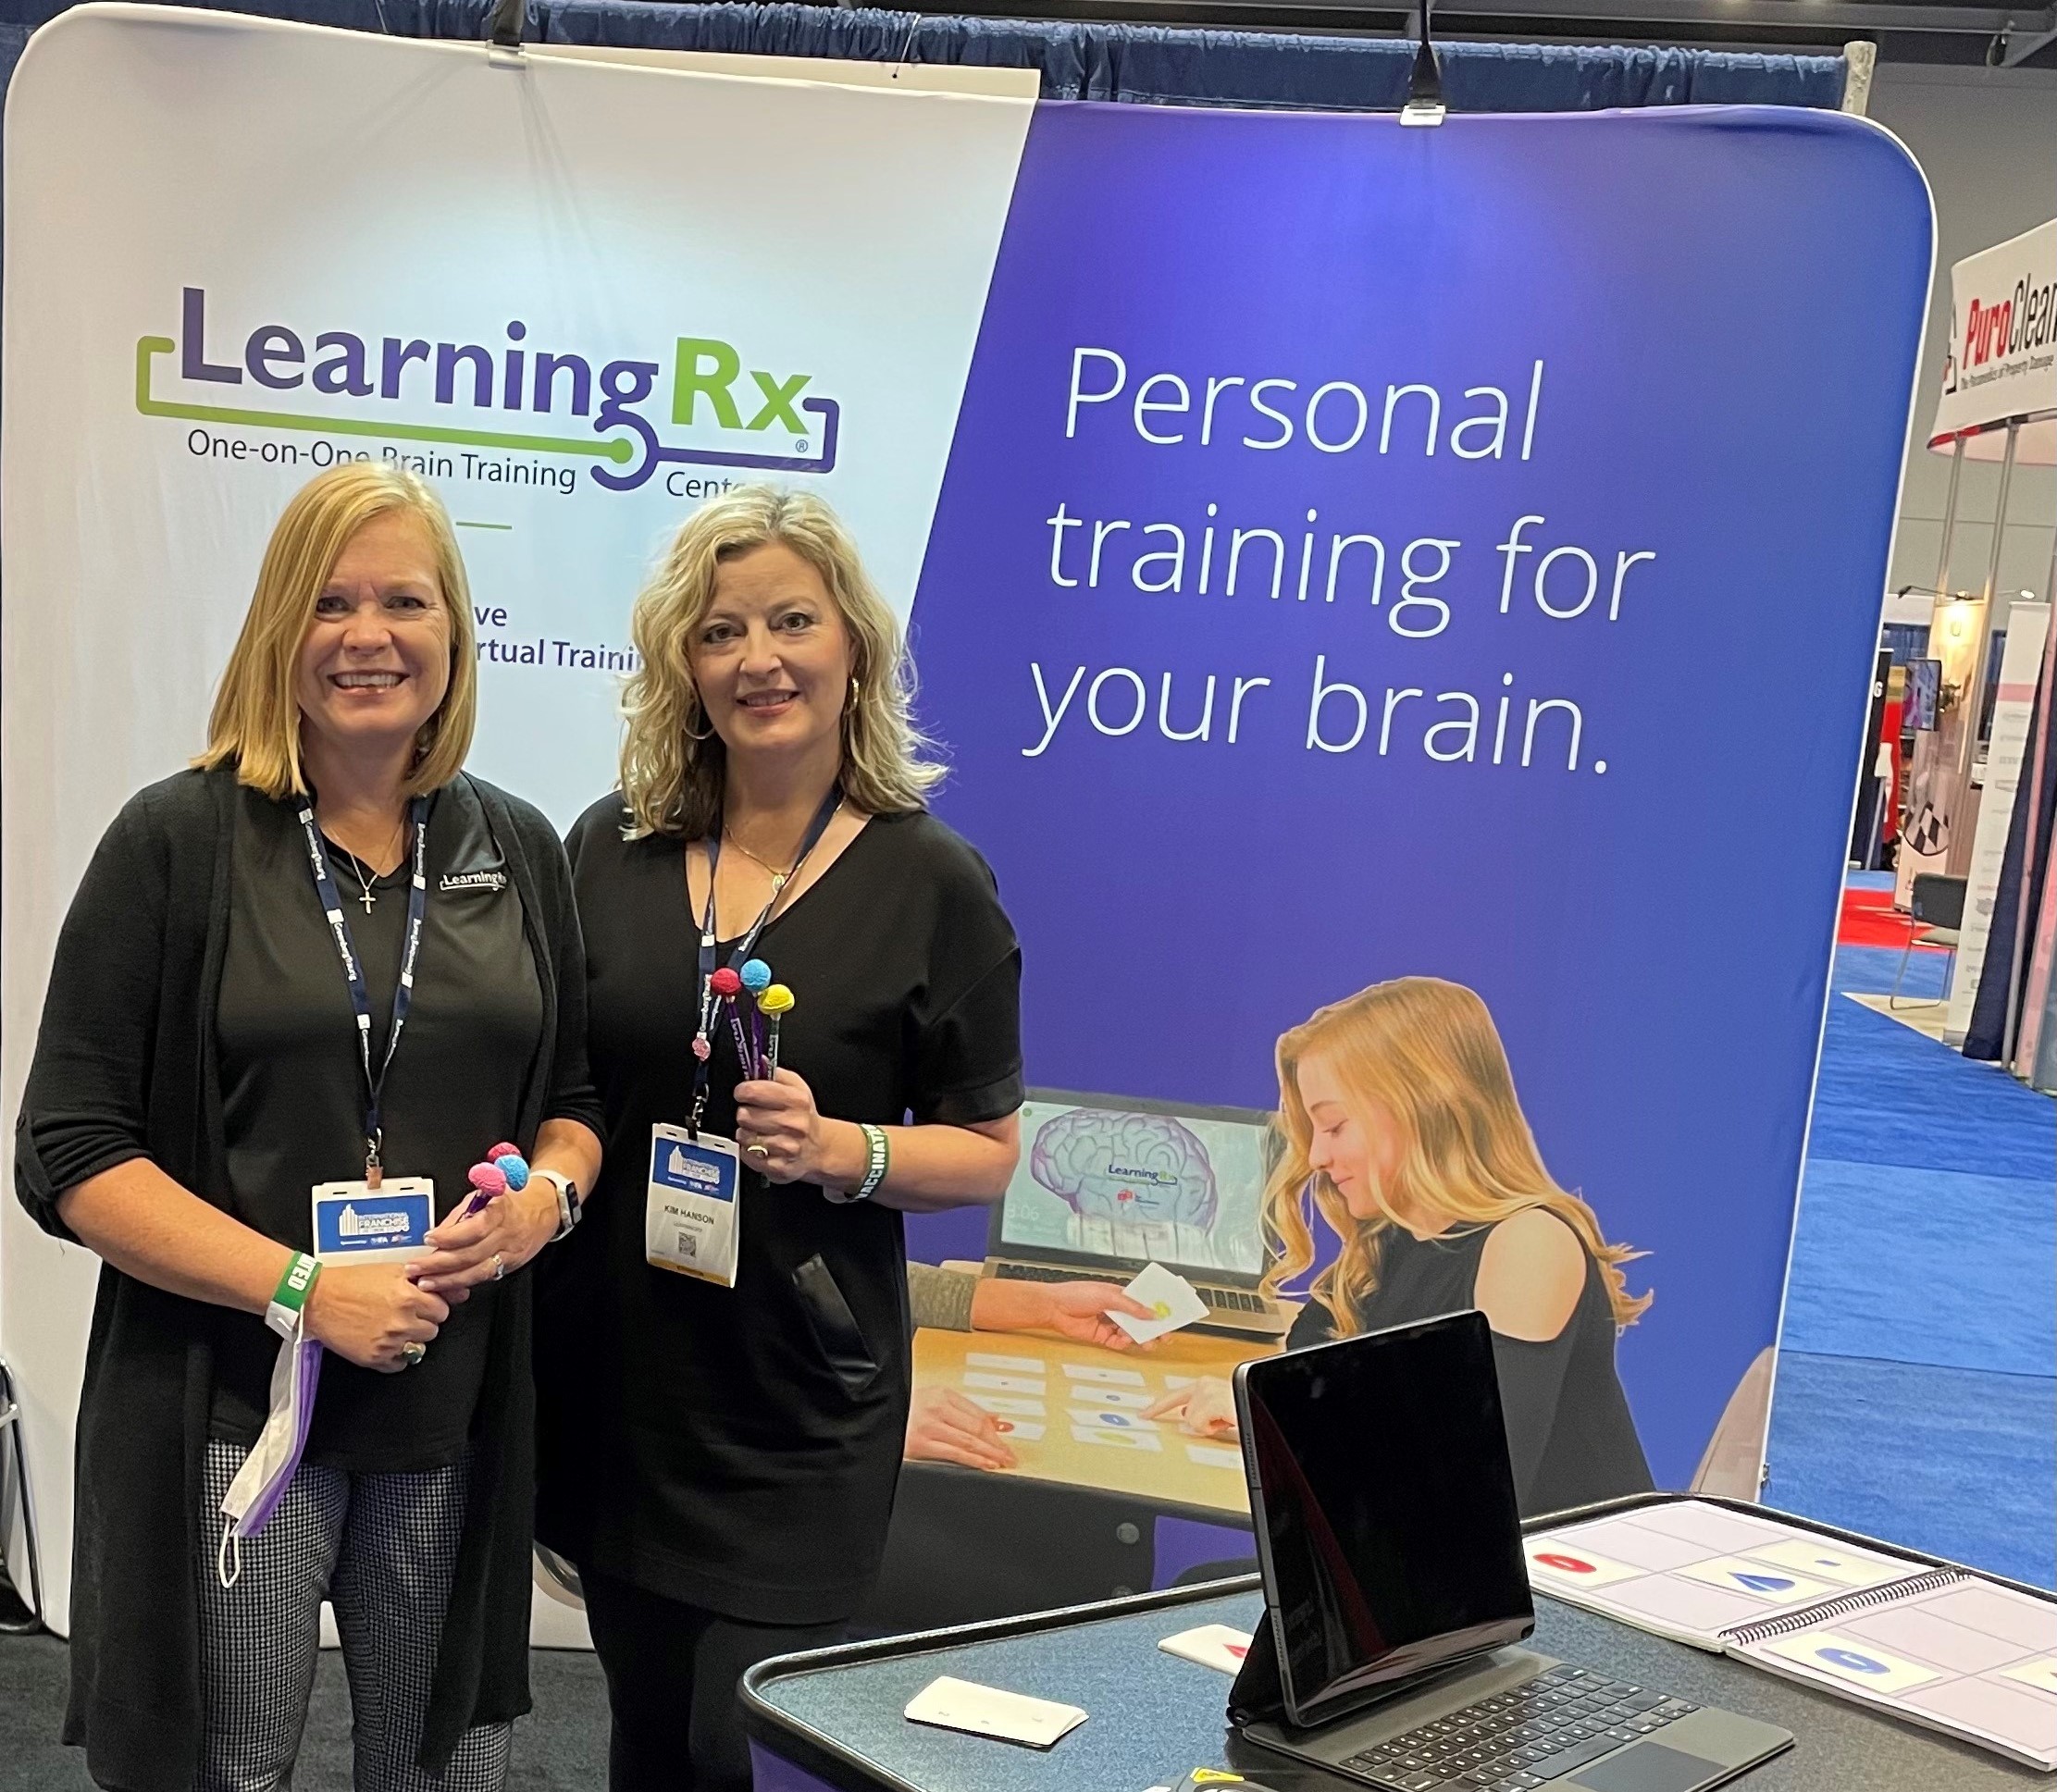 LearningRx Meets with Franchisee Candidates at the International Franchise Expo